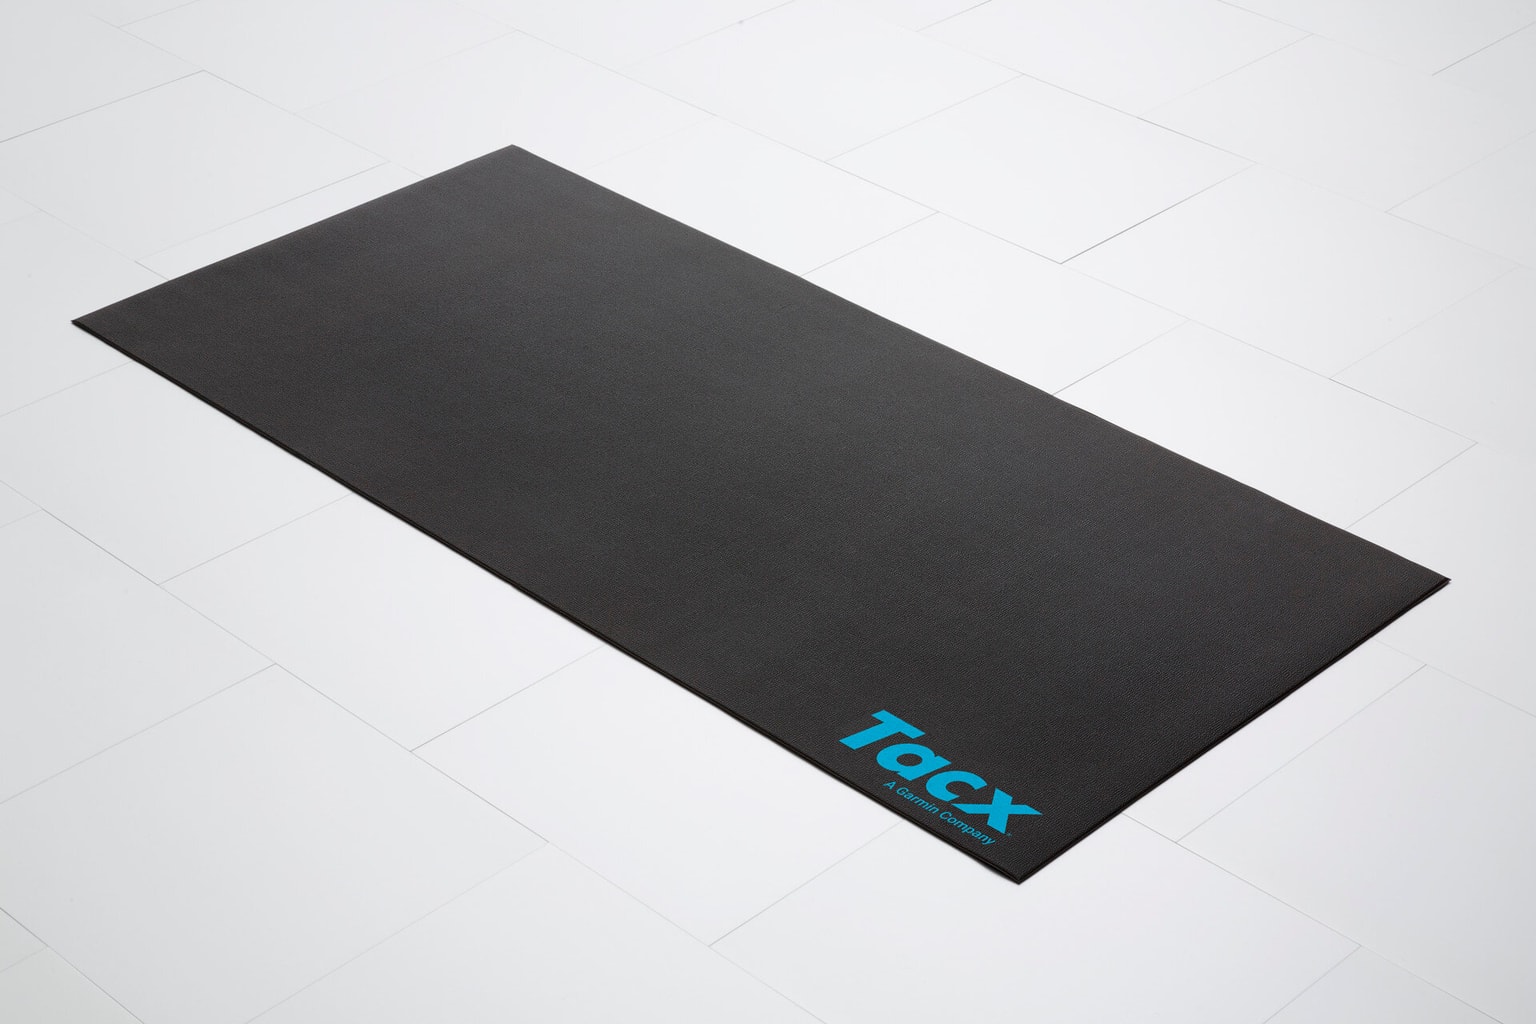 Tacx Tacx Trainermat Rollable Rollentrainer Zubehör 1